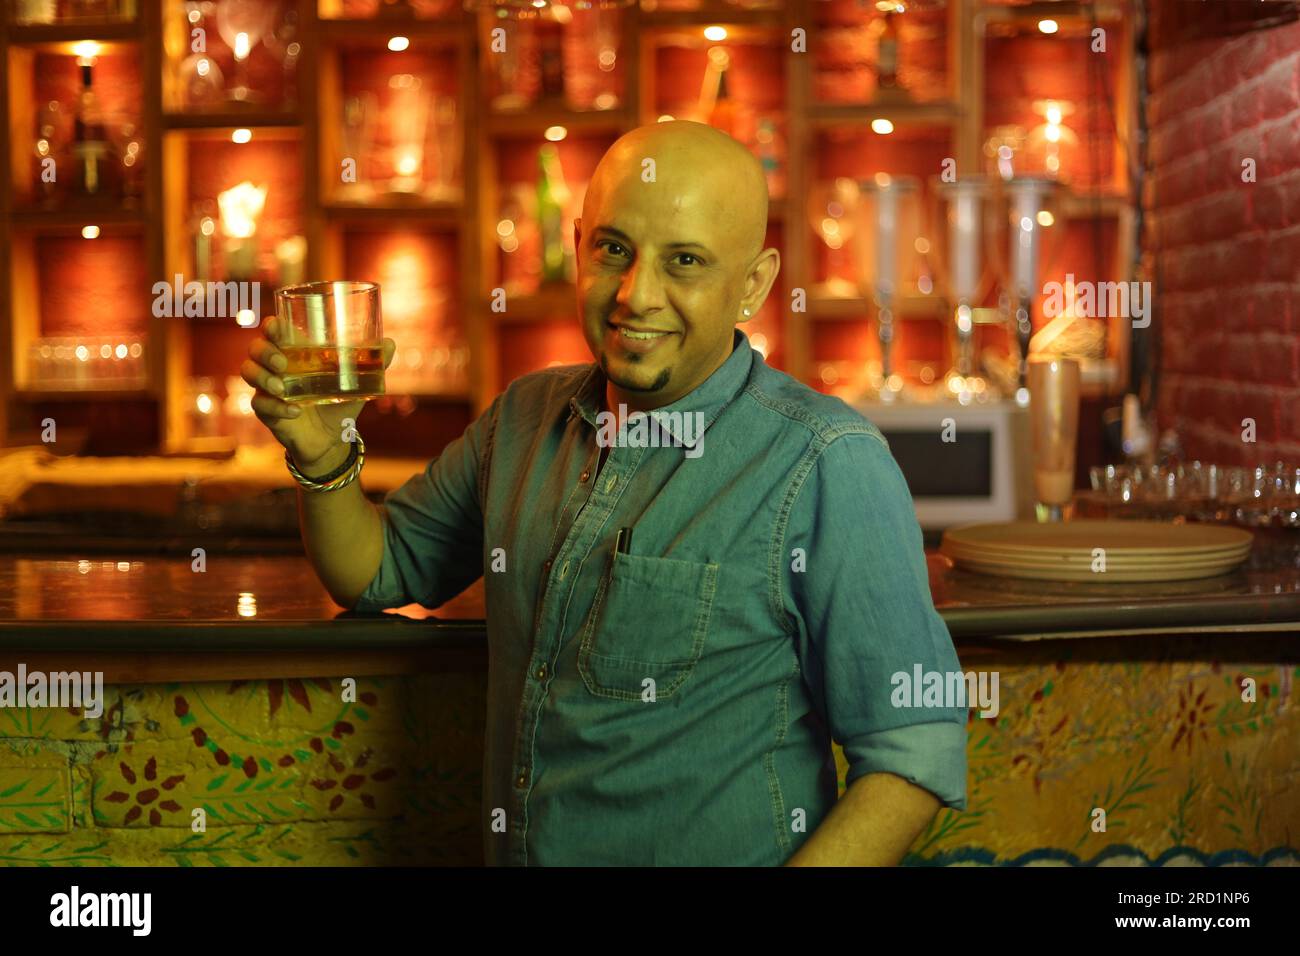 Young and flamboyant handsome bald guy standing on bar counter. Attractive man enjoying in city club interior at night club. Holding whiskey. Stock Photo